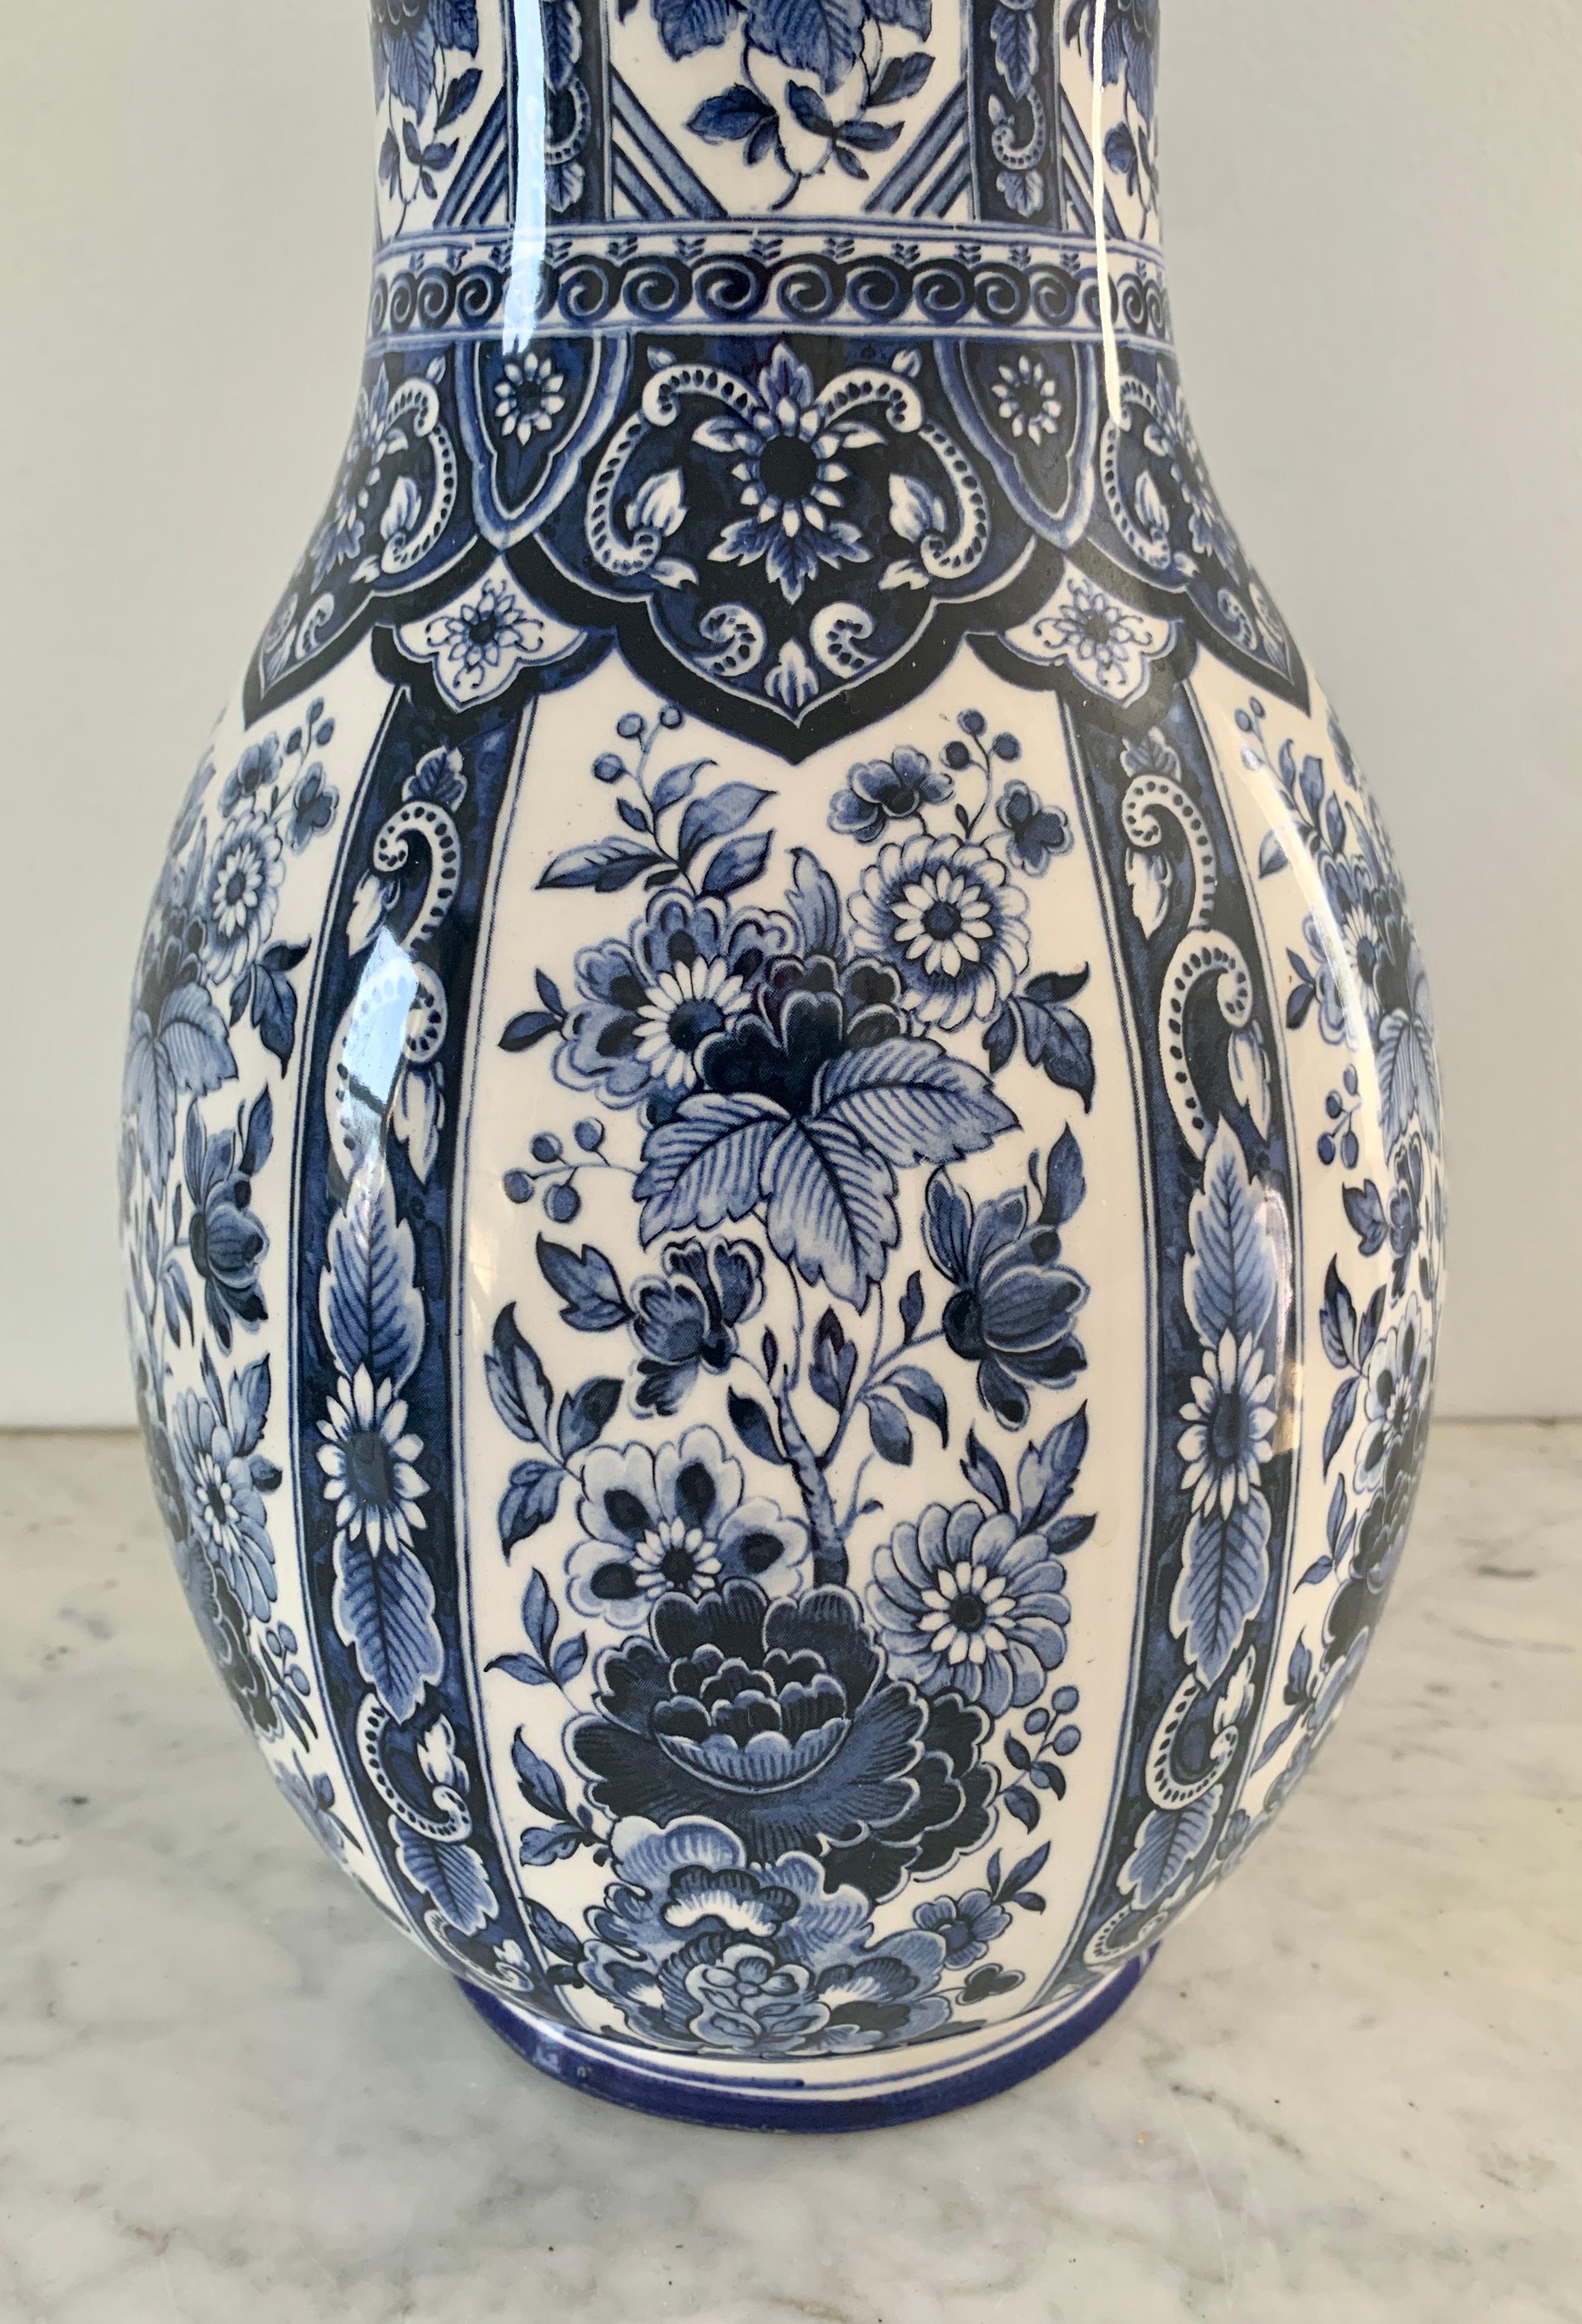 Chinoiserie Delfts Blue and White chinoiserie Porcelain Vase